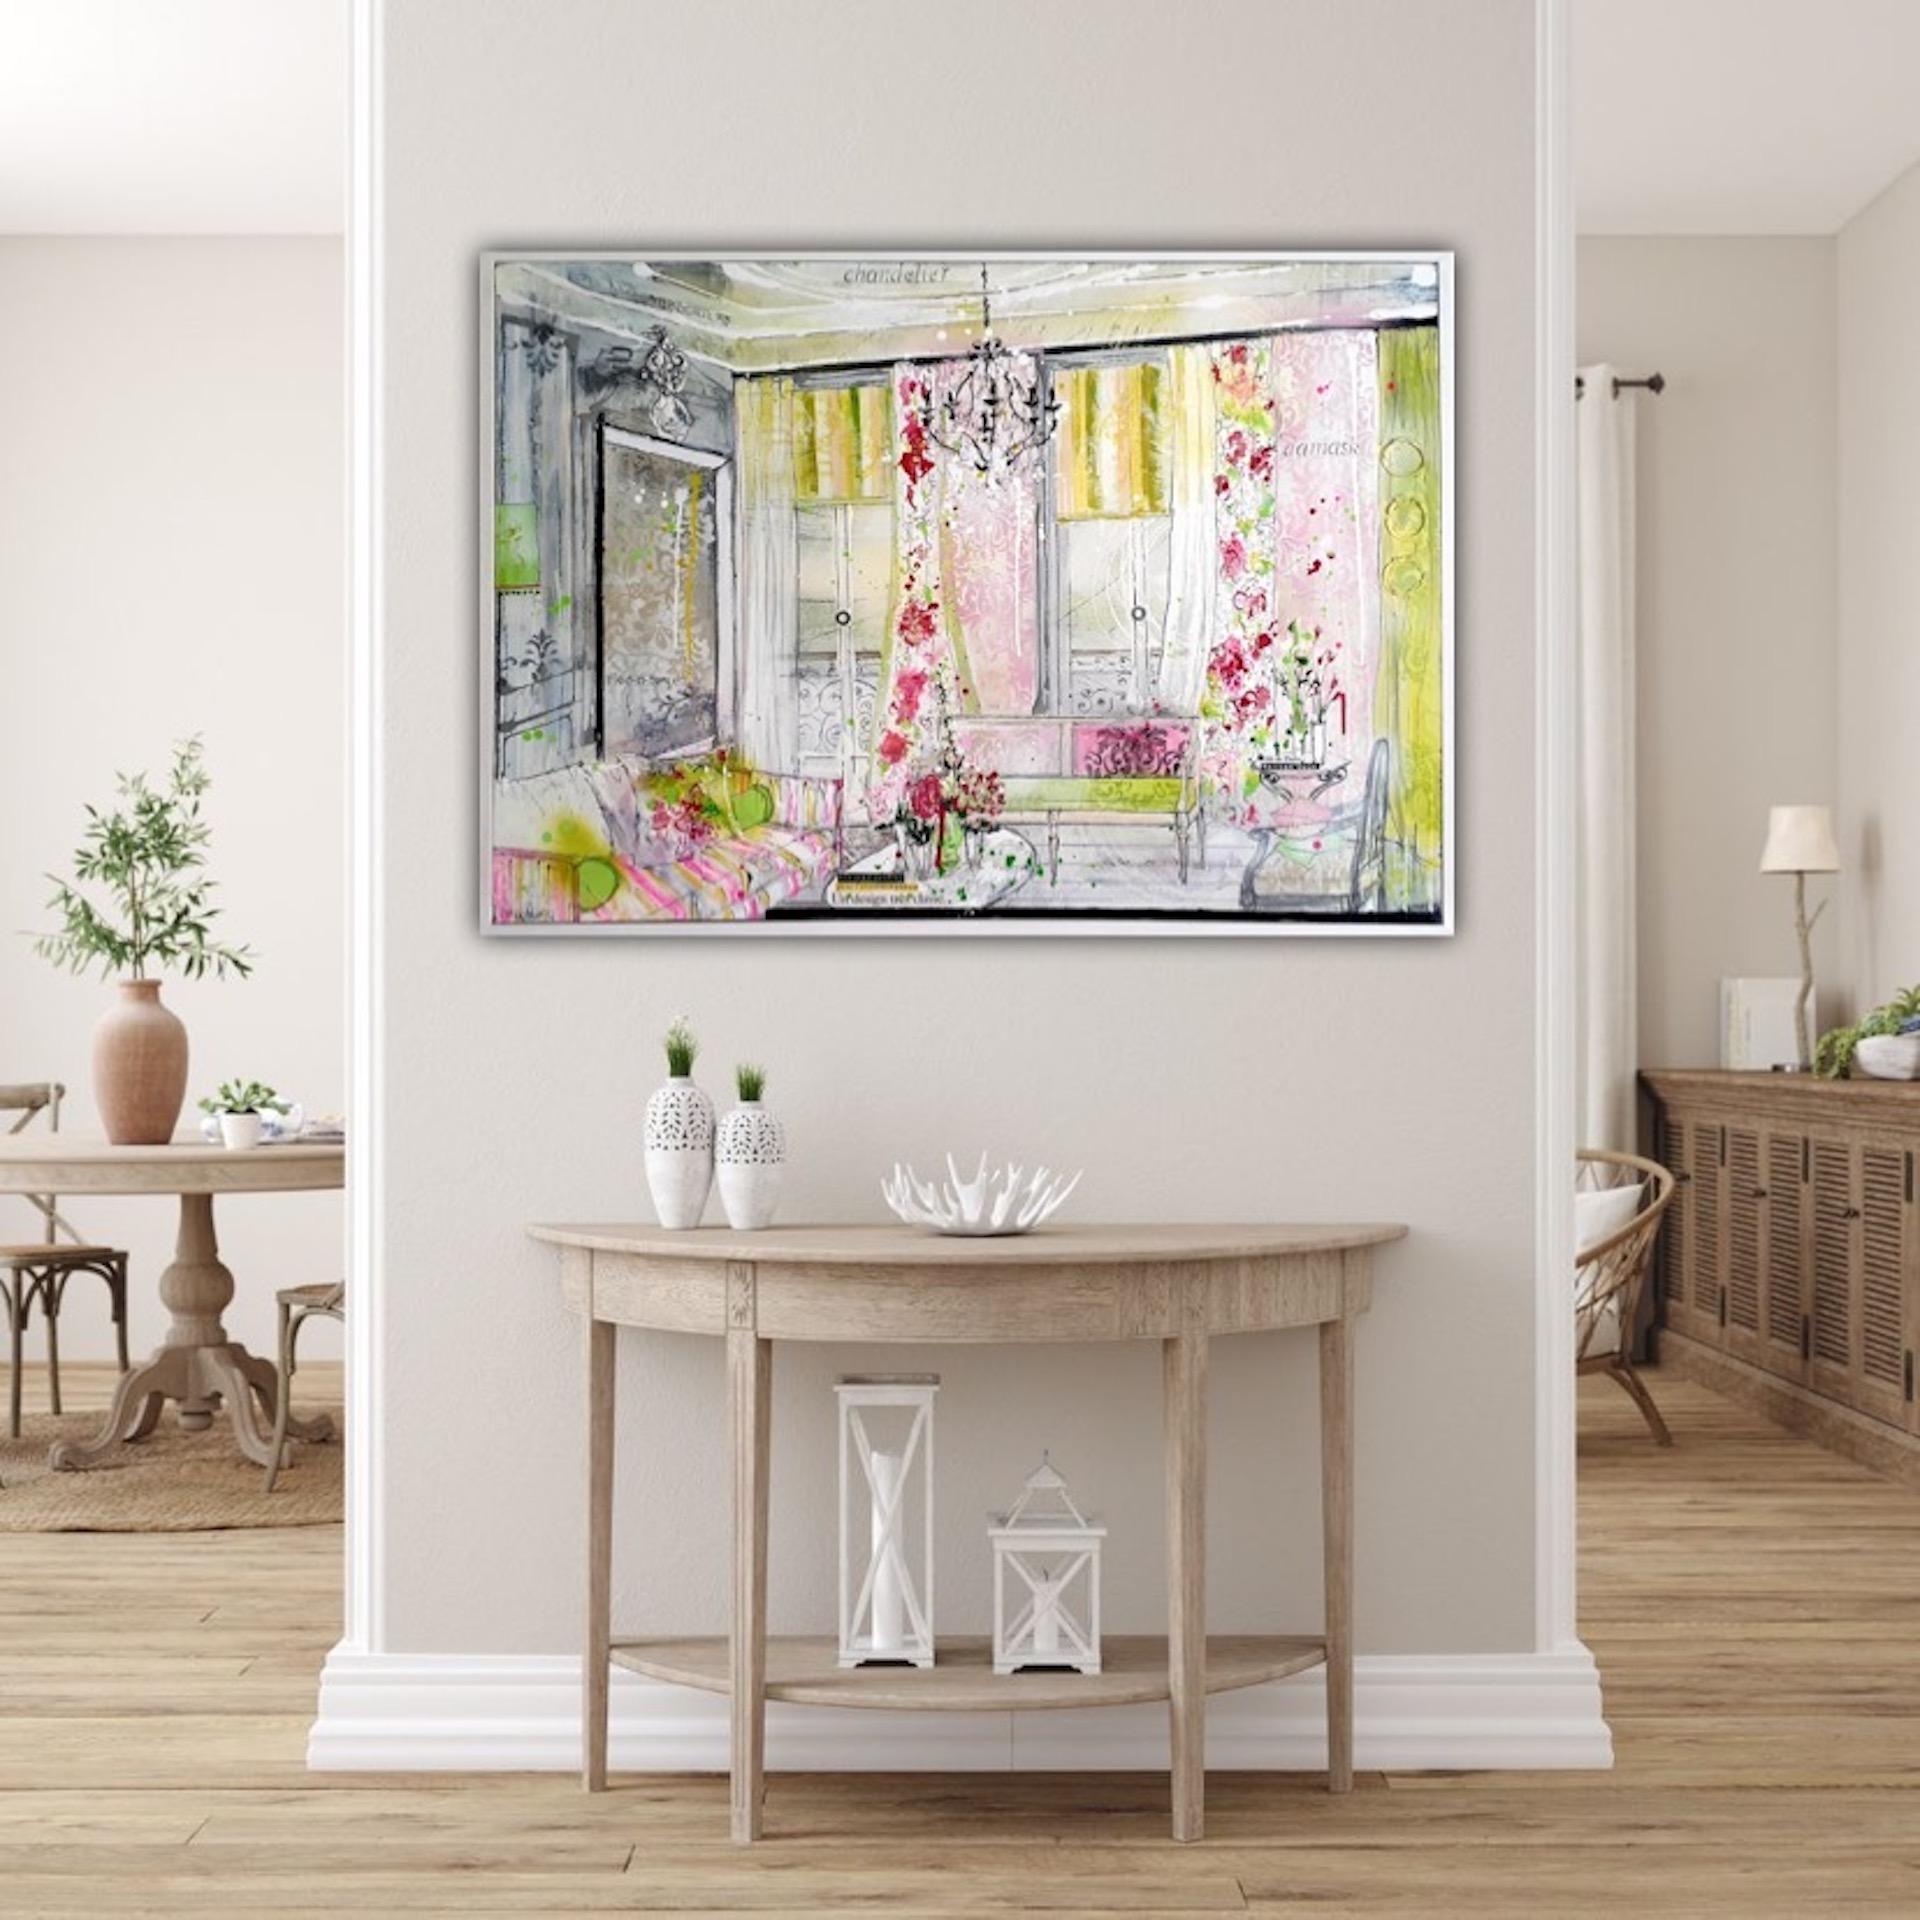 Julia Adams
Refined Luxury
Original Interior Painting
Mixed Media with Acrylic Inks on Canvas
Canvas Size: H 70cm x W 100cm x D 3.5cm
Sold framed
(Please note that in situ images are purely an indication of how a piece may look).

Refined Luxury is